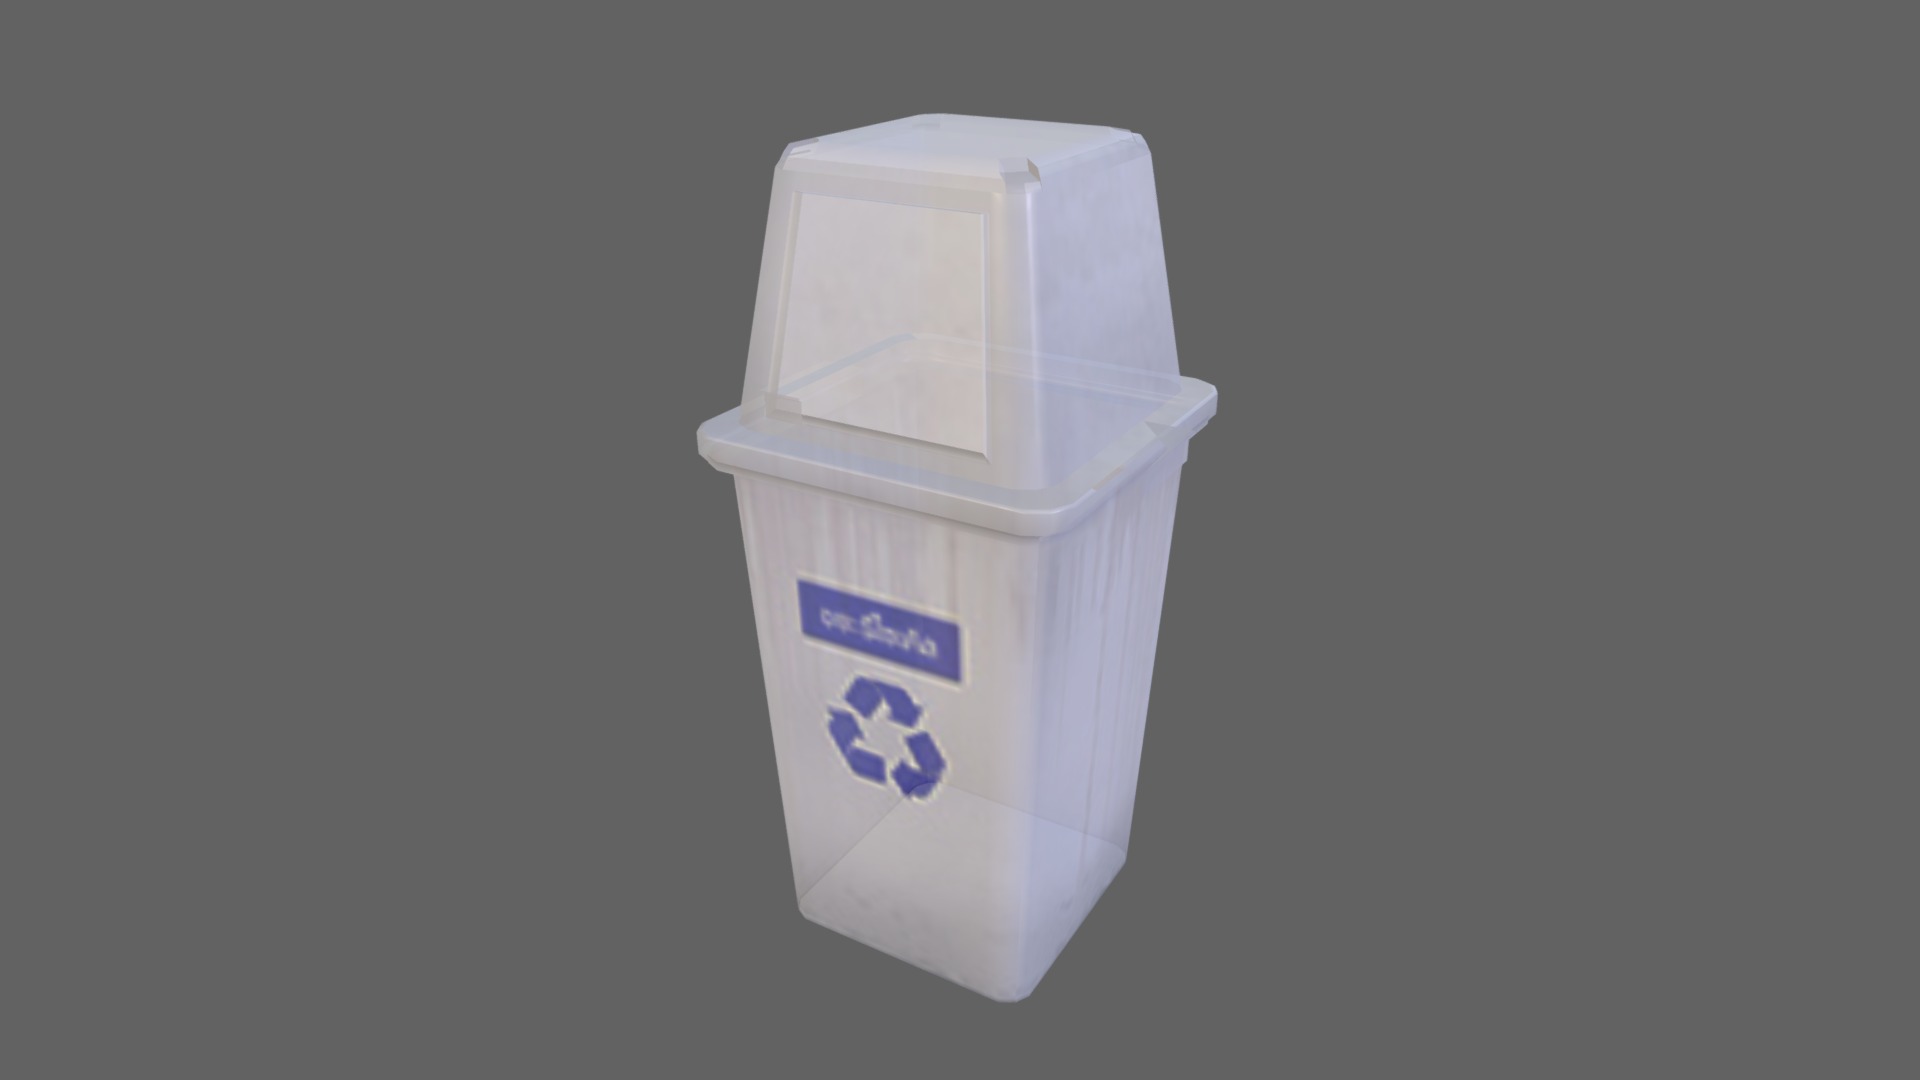 3D model Low Poly Bin - This is a 3D model of the Low Poly Bin. The 3D model is about a white container with a blue logo.